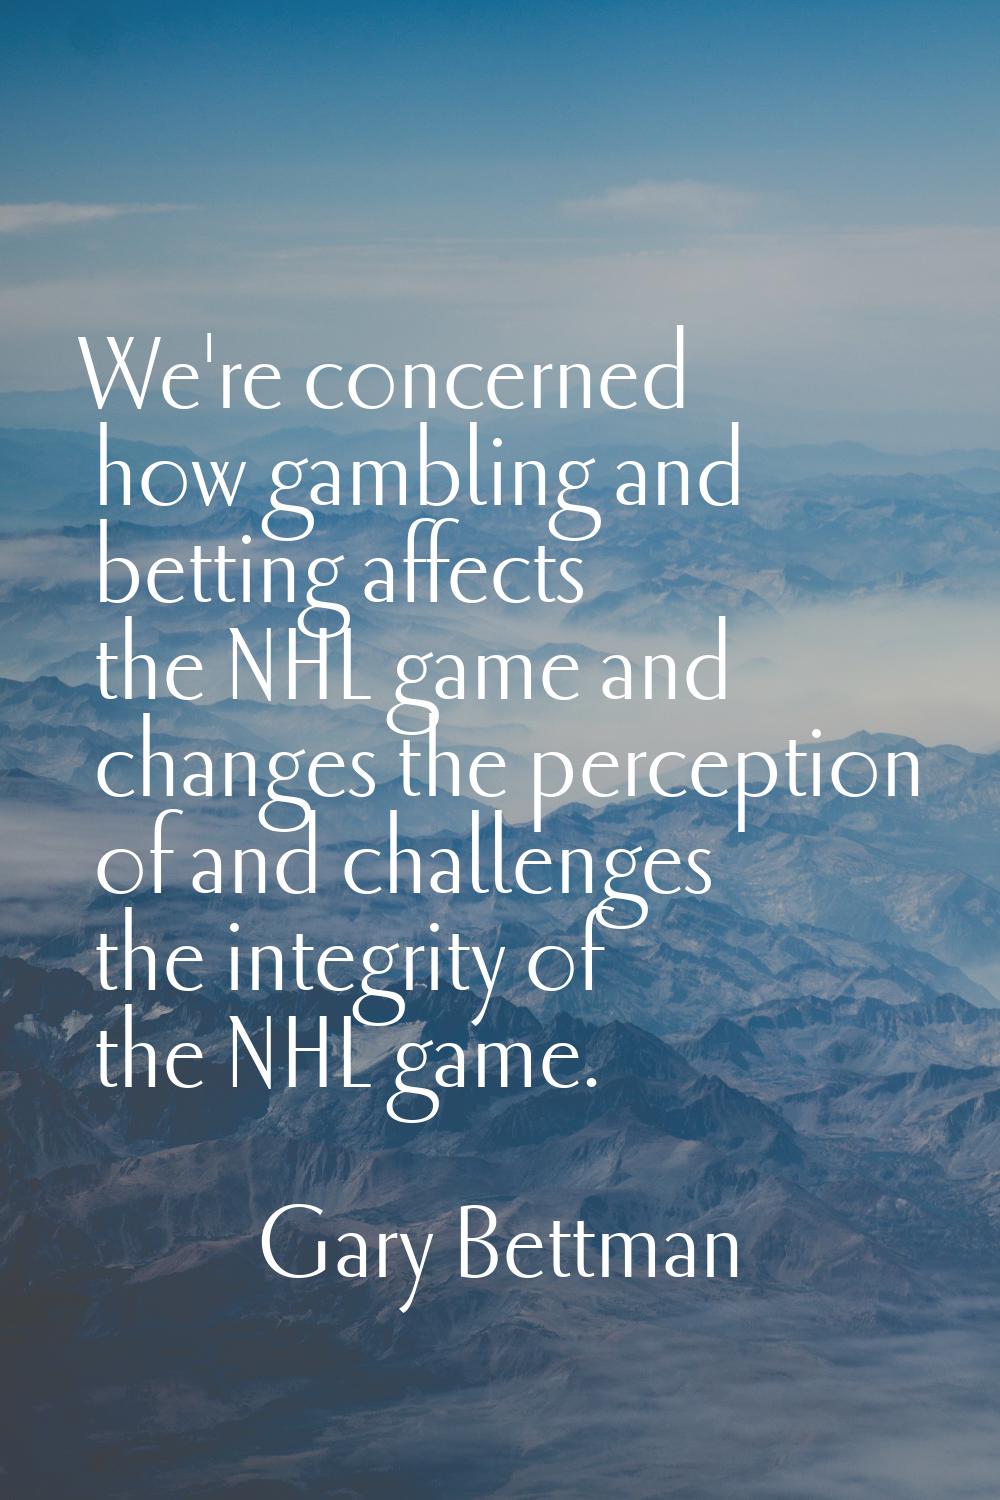 We're concerned how gambling and betting affects the NHL game and changes the perception of and cha